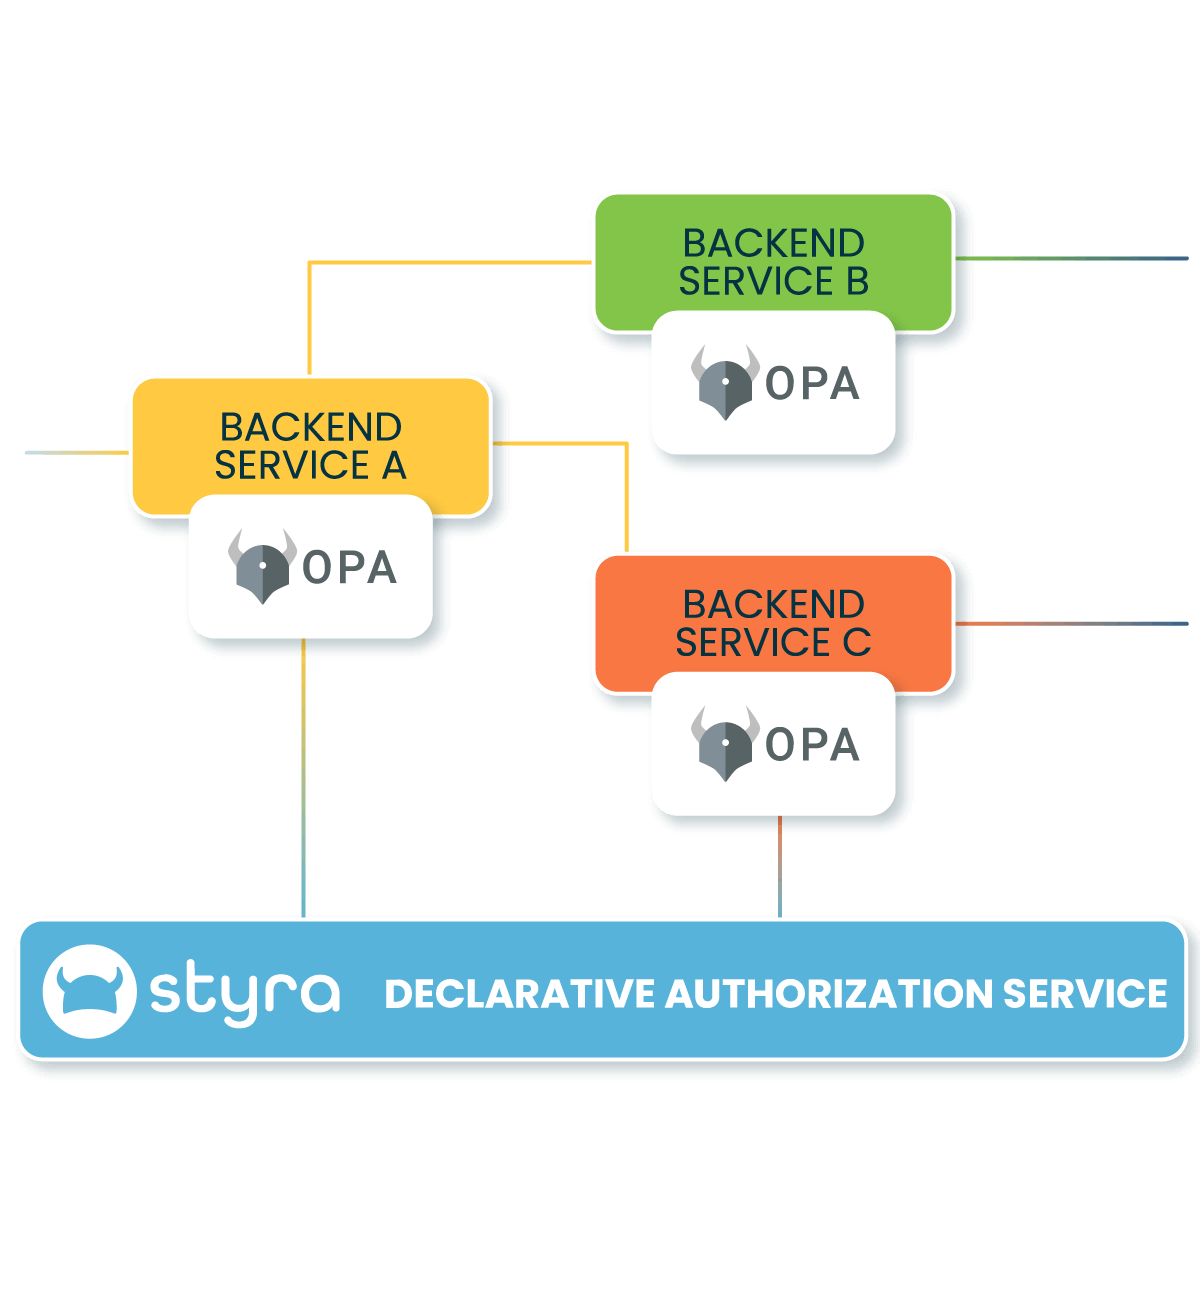 Control communication between microservices with OPA and Styra DAS